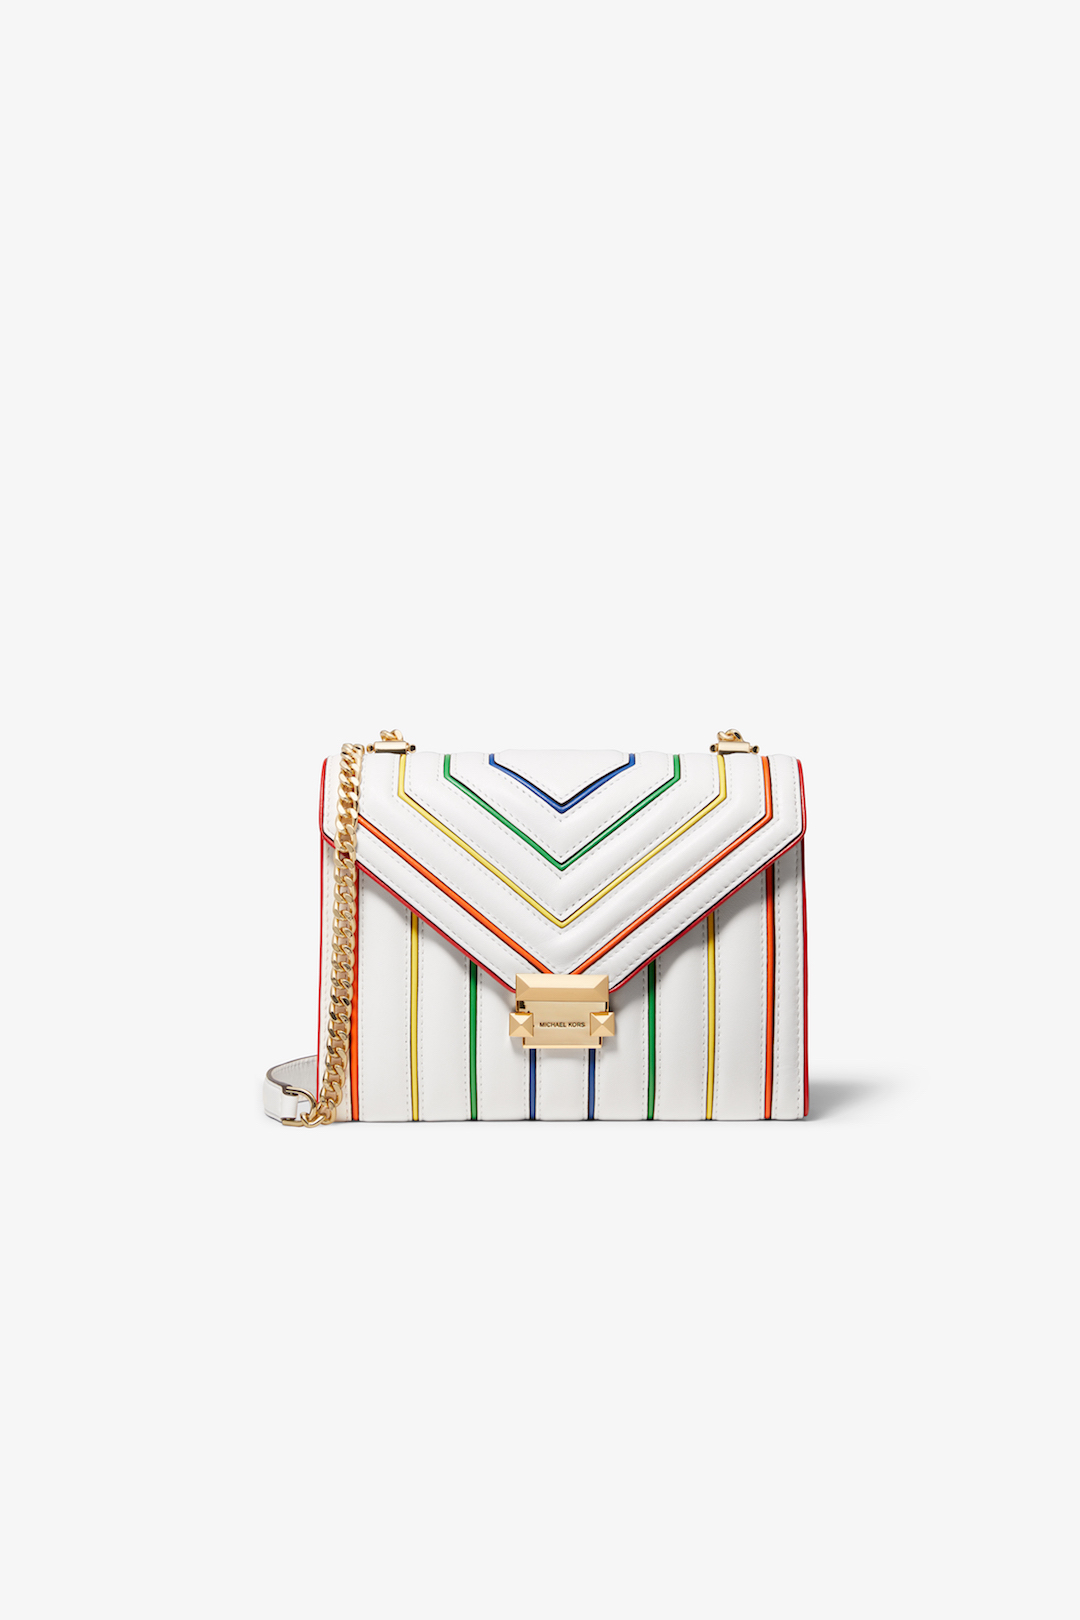 MICHAEL Michael Kors Rainbow Quilted Leather Whitney Shoulder Bag.jpg